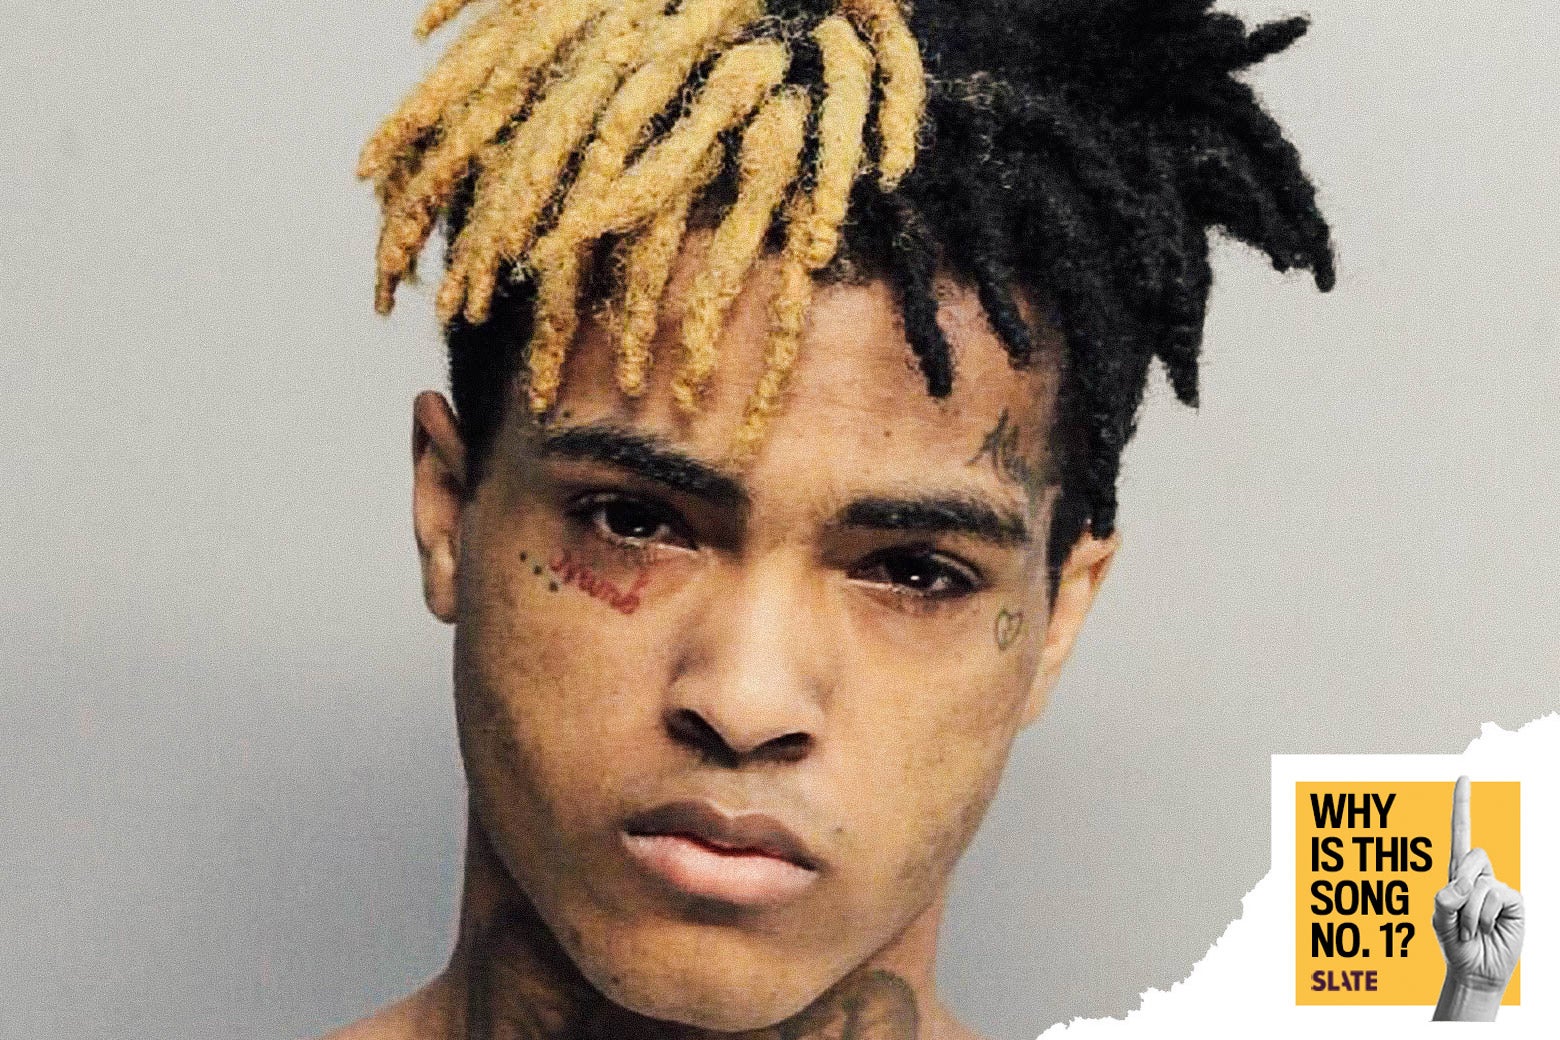 A mug shot of XXXTentacion with the Why Is This Song No. 1? logo.